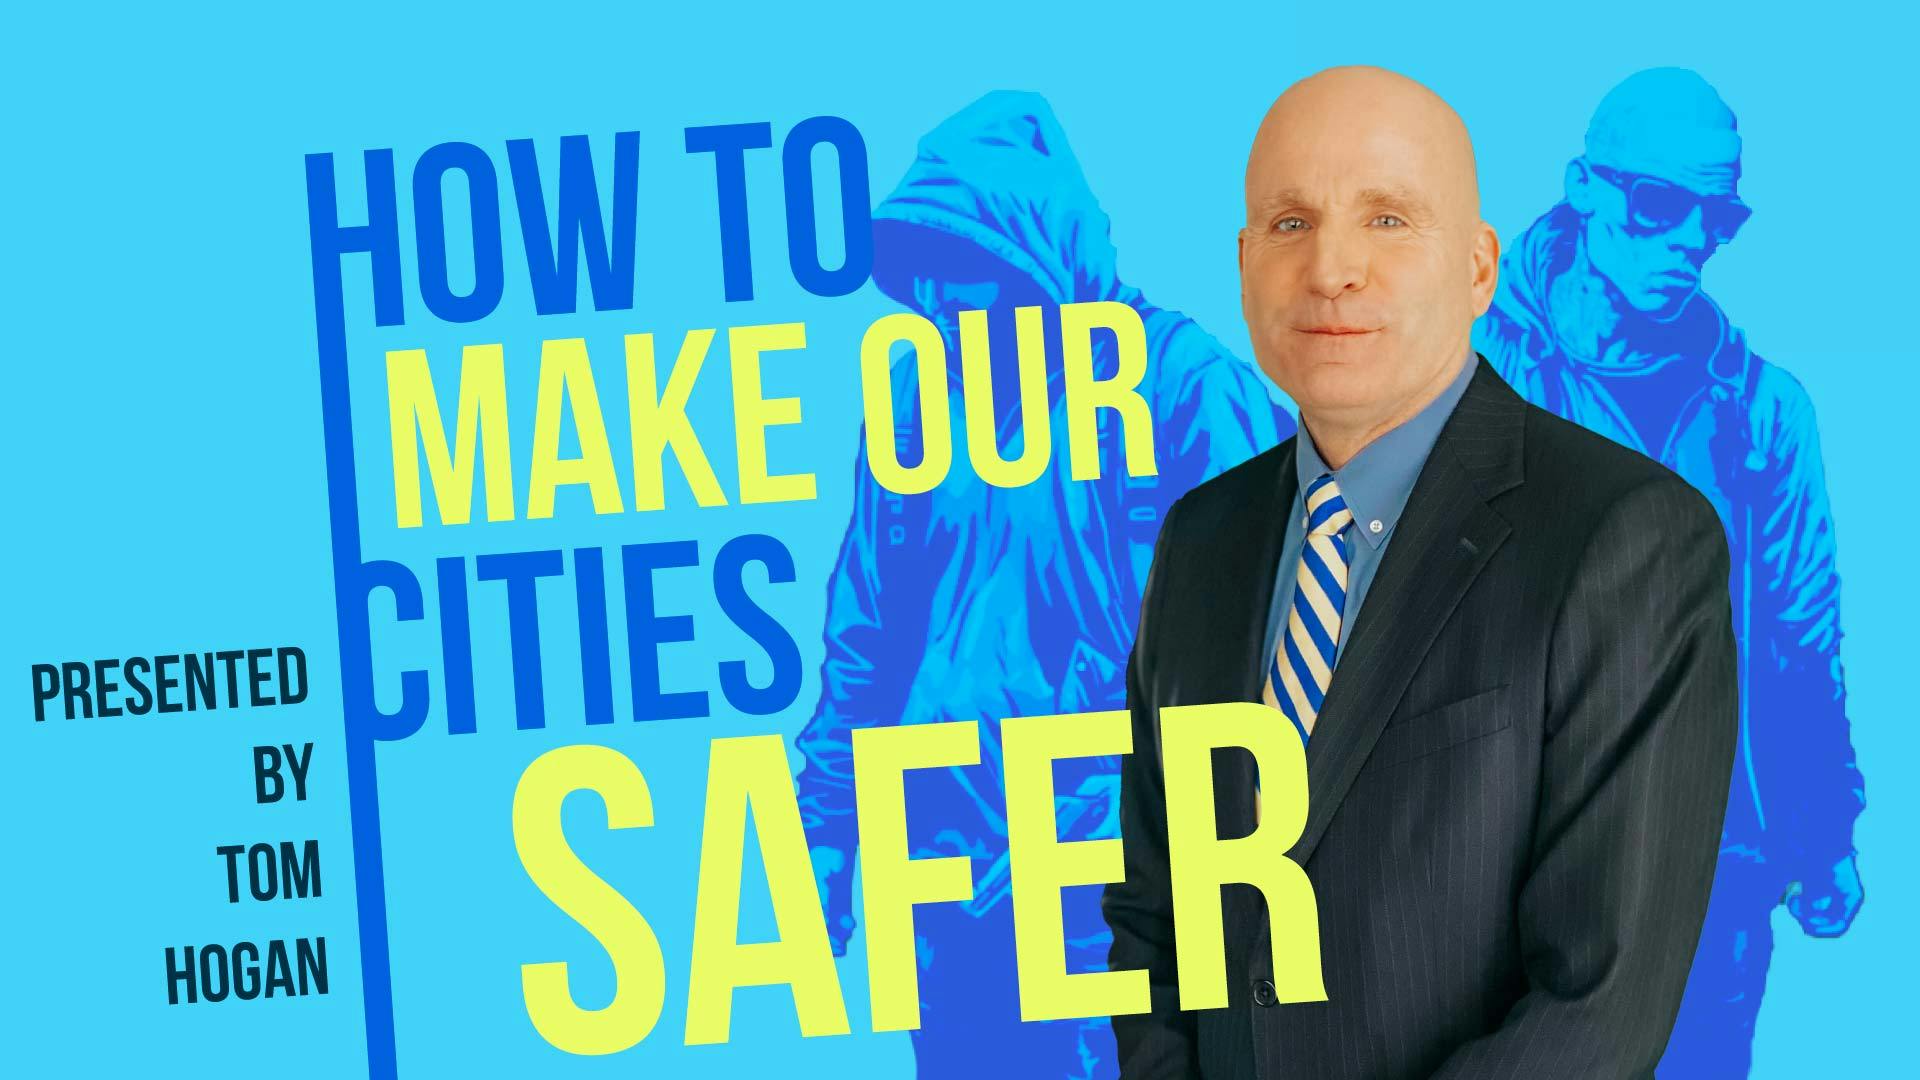 How to Make Our Cities Safer